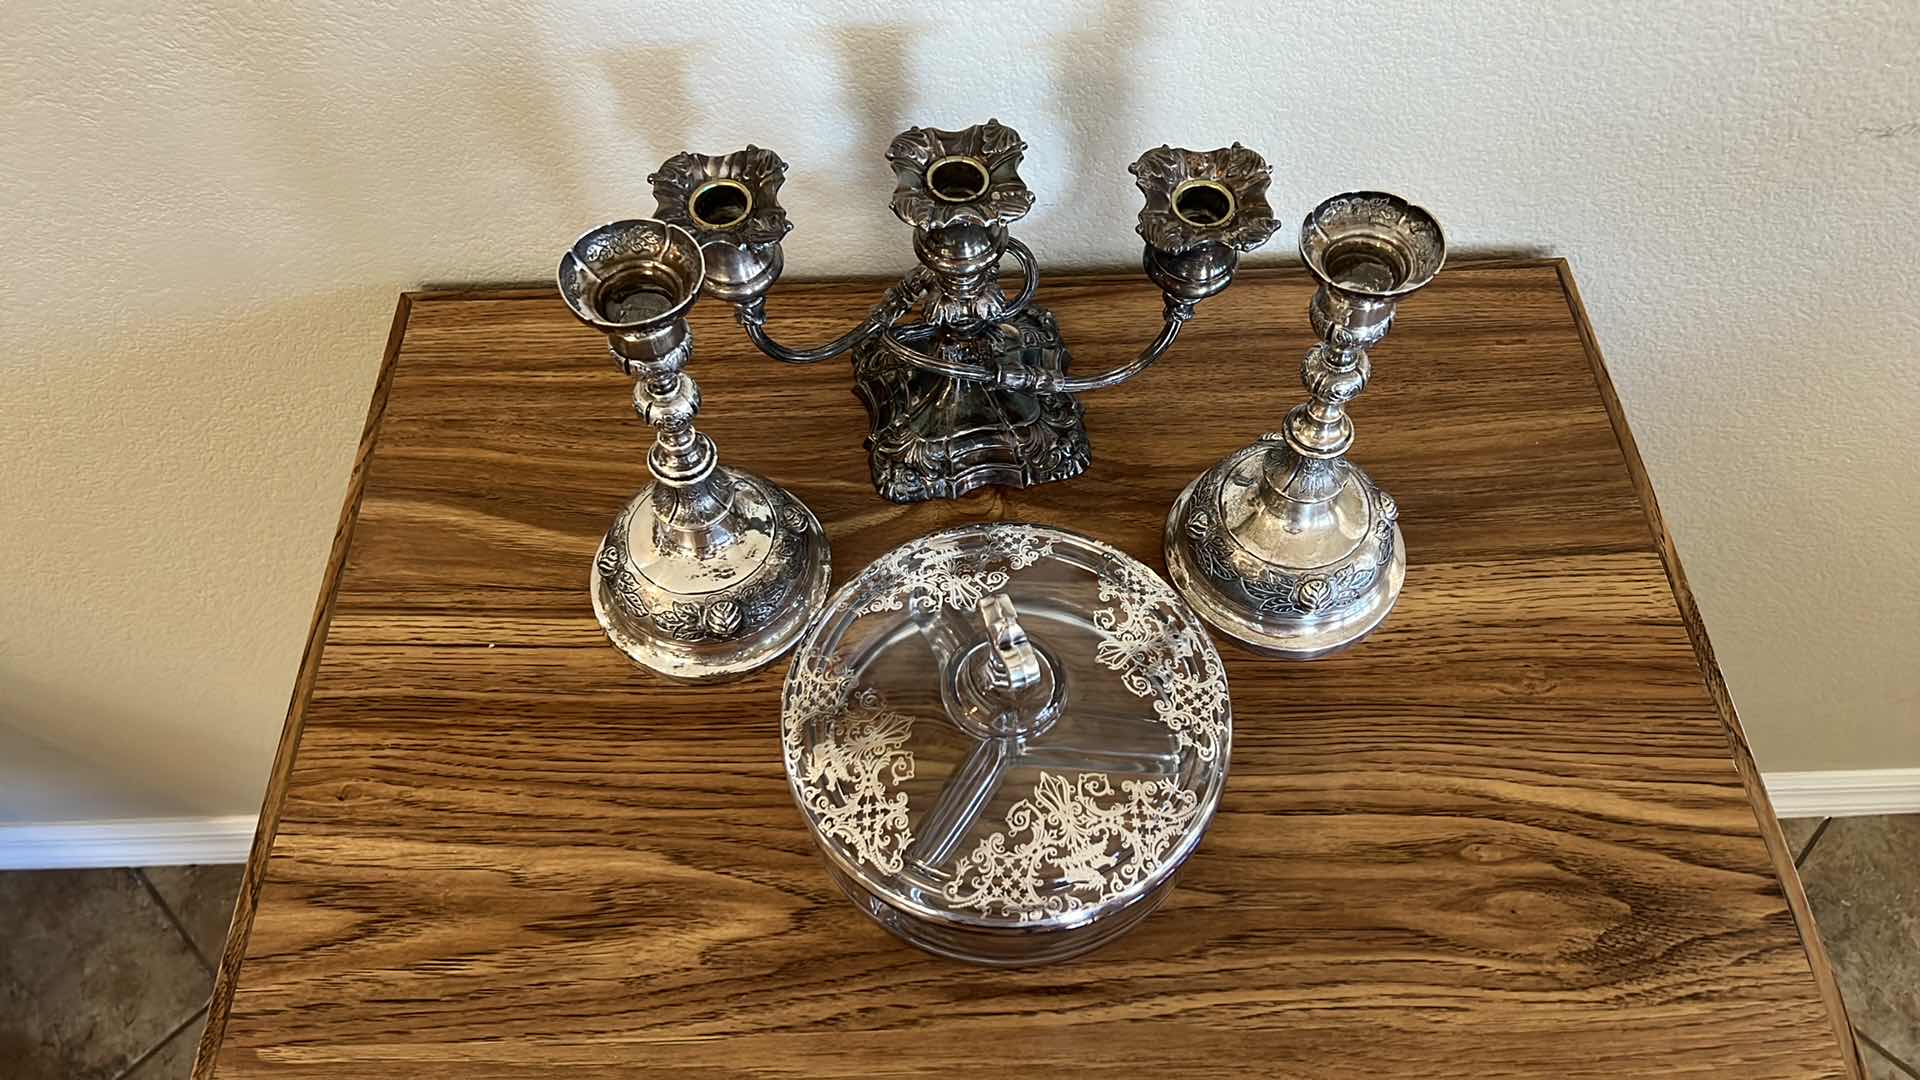 Photo 2 of SILVER-PLATED CANDLEHOLDERS, VINTAGE GLASS COVERED CANDY DISH